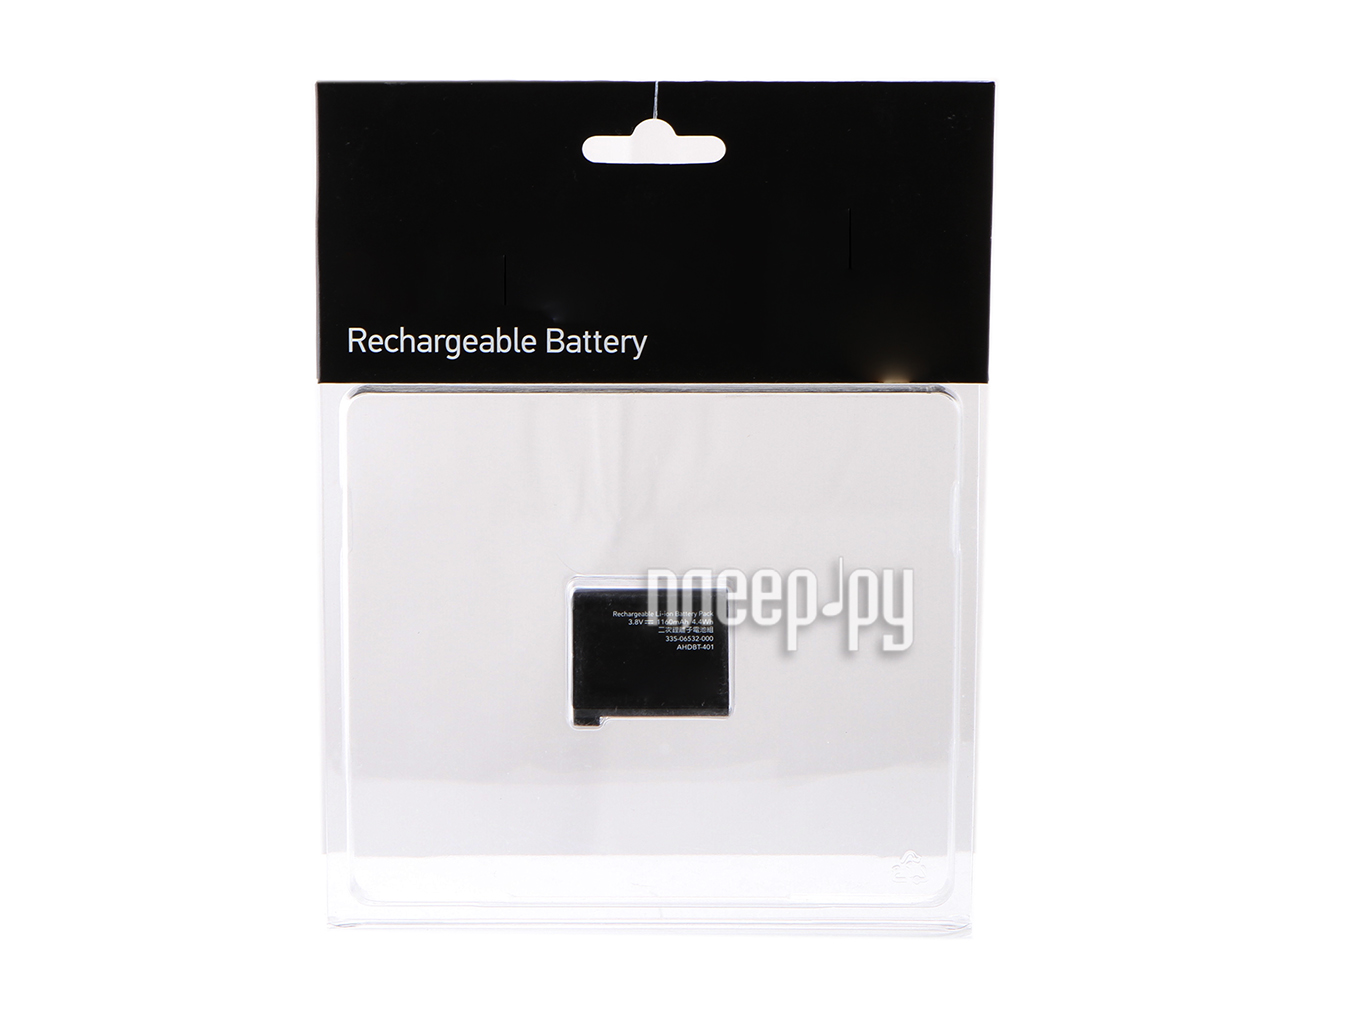  GoPro Rechargeable Battery for HERO4 AHDBT-401 